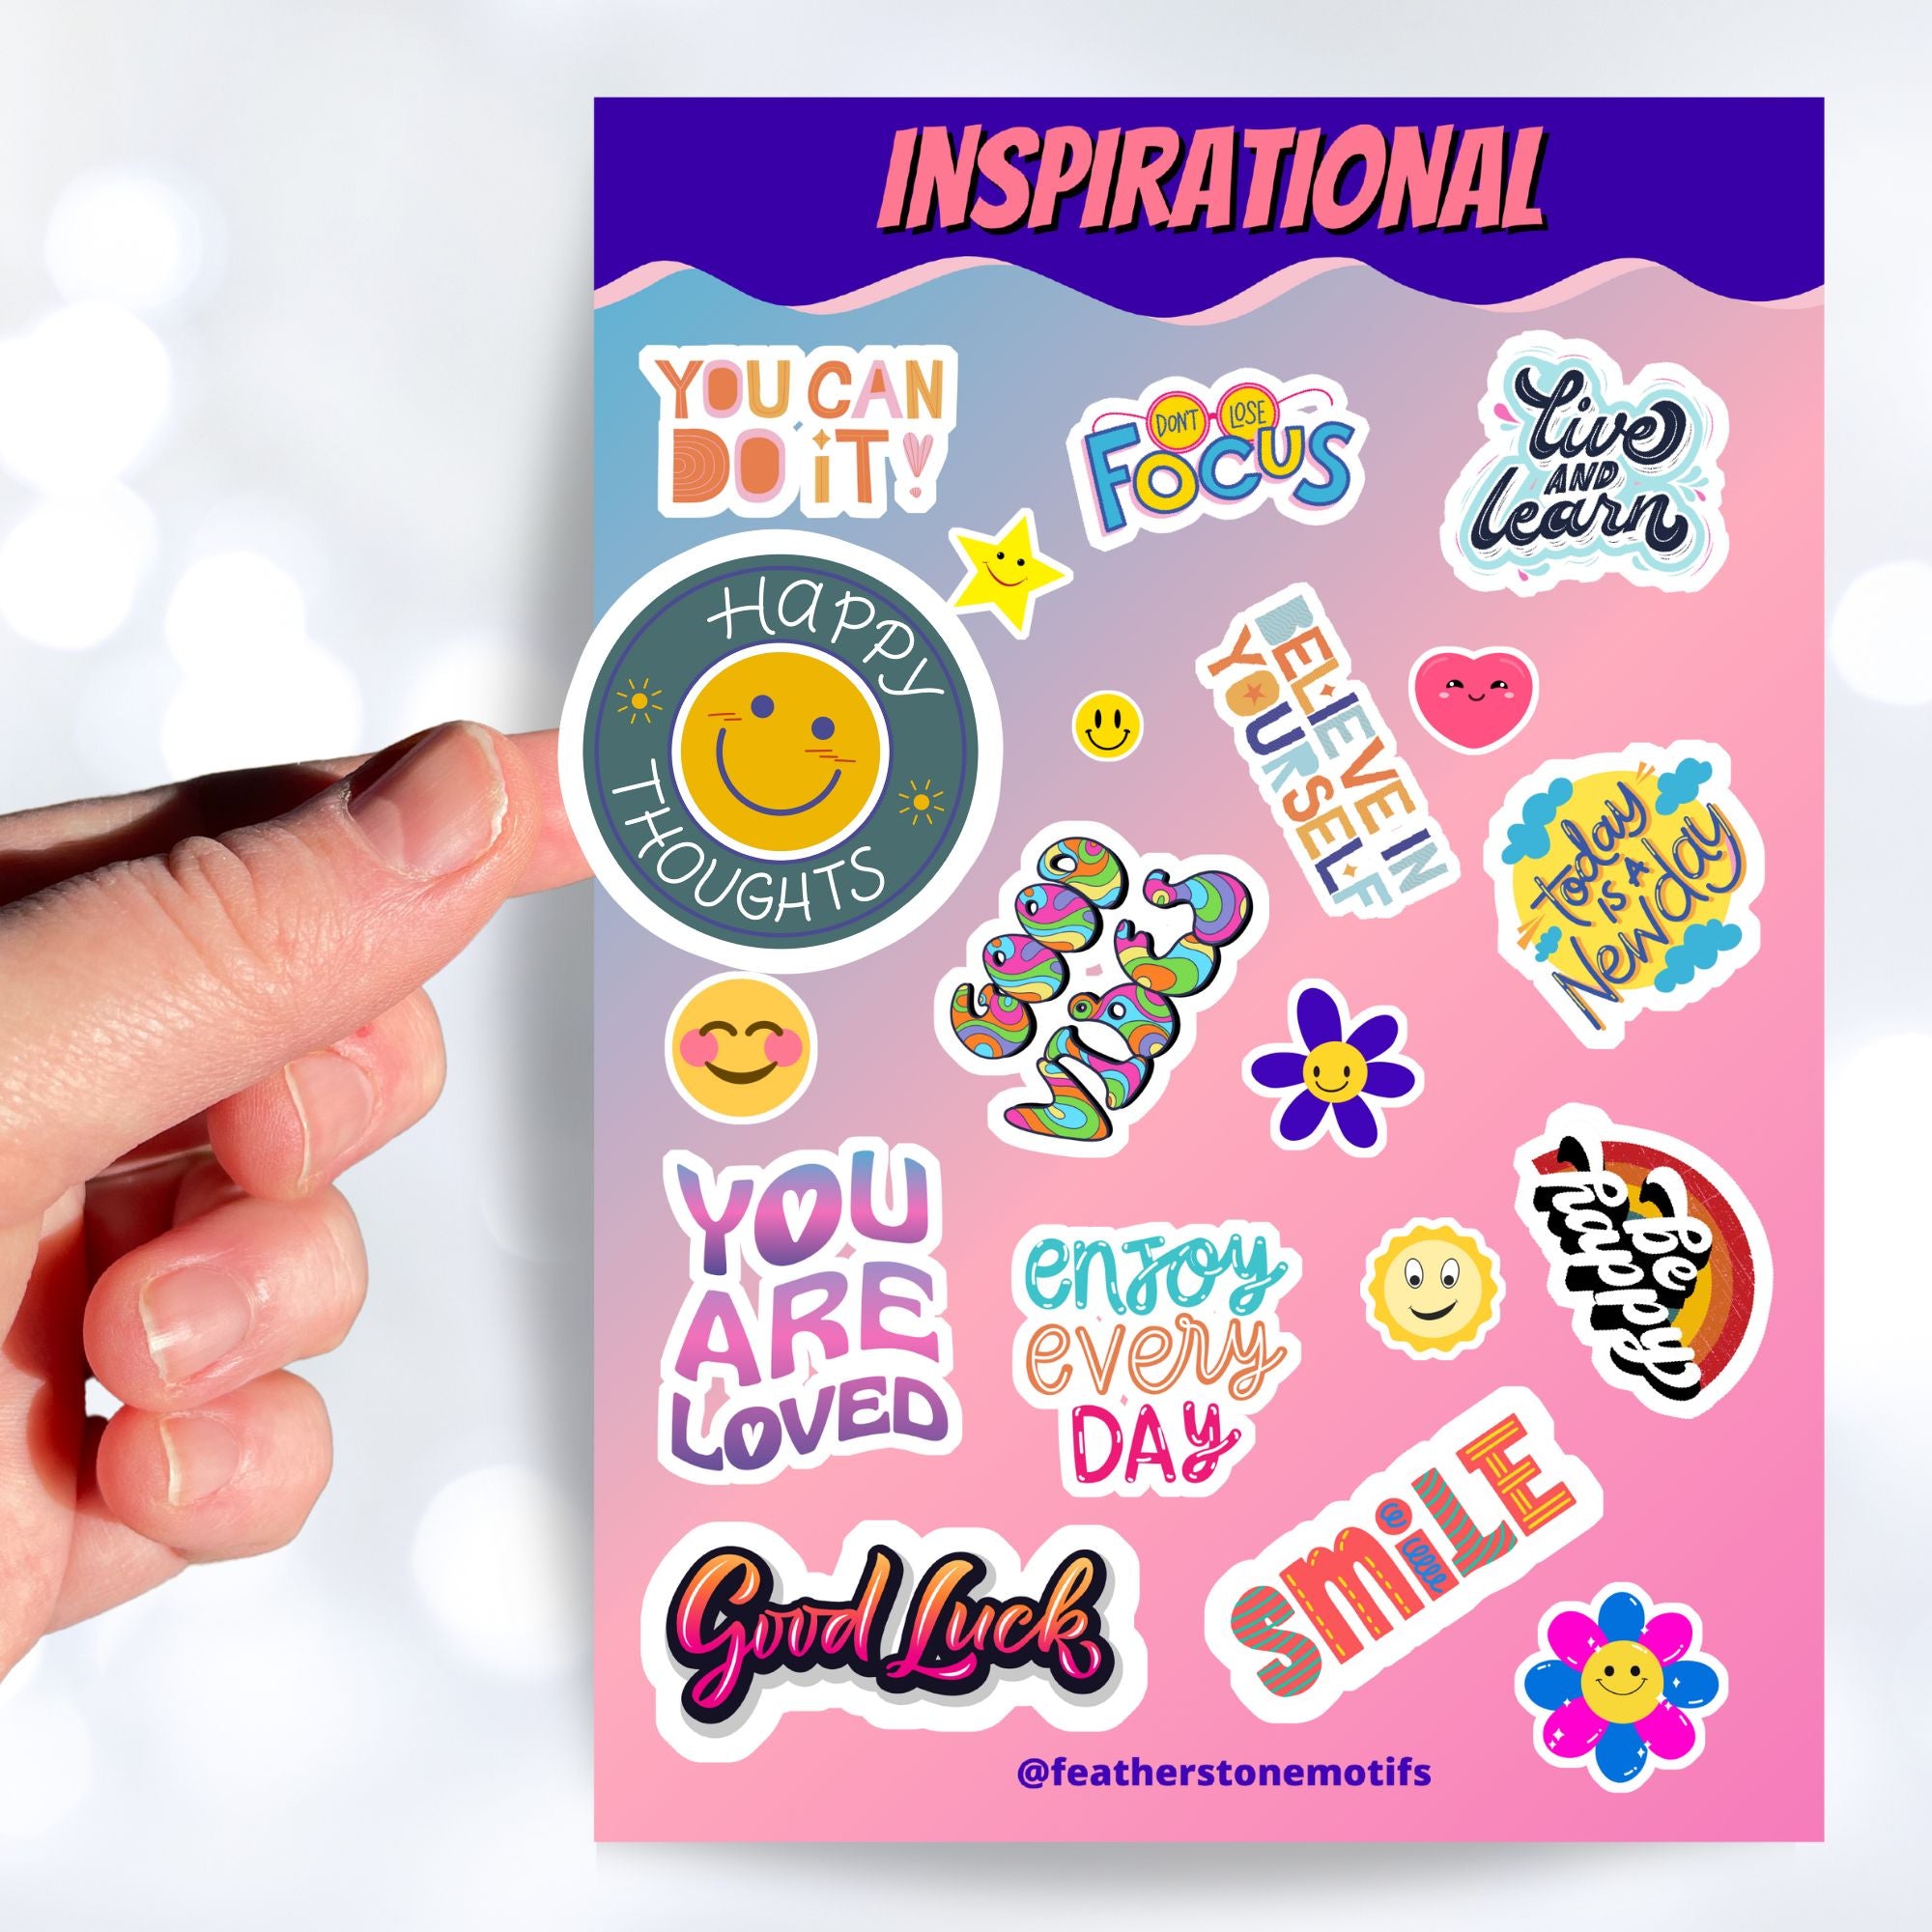 Feel good with these inspirational thoughts as stickers! This sheet has a dozen stickers with inspirational sayings, plus some smaller stickers to help brighten anyone's day. This image shows a hand holding a happy face sticker with the caption "Happy Thoughts" over the sticker sheet.